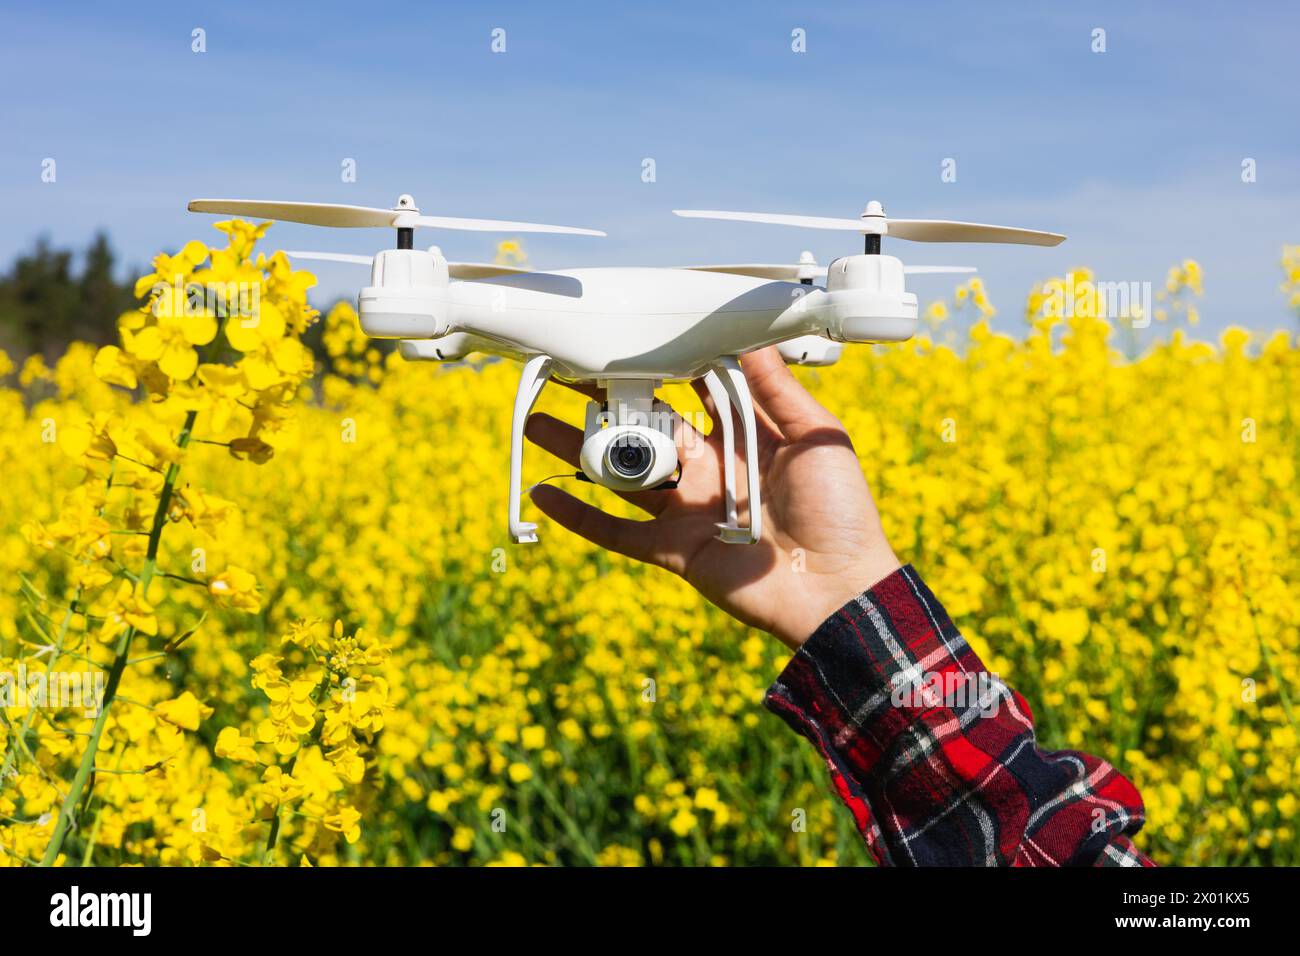 Innovation and agricultural technology for control and monitoring of crop pests and diseases Stock Photo